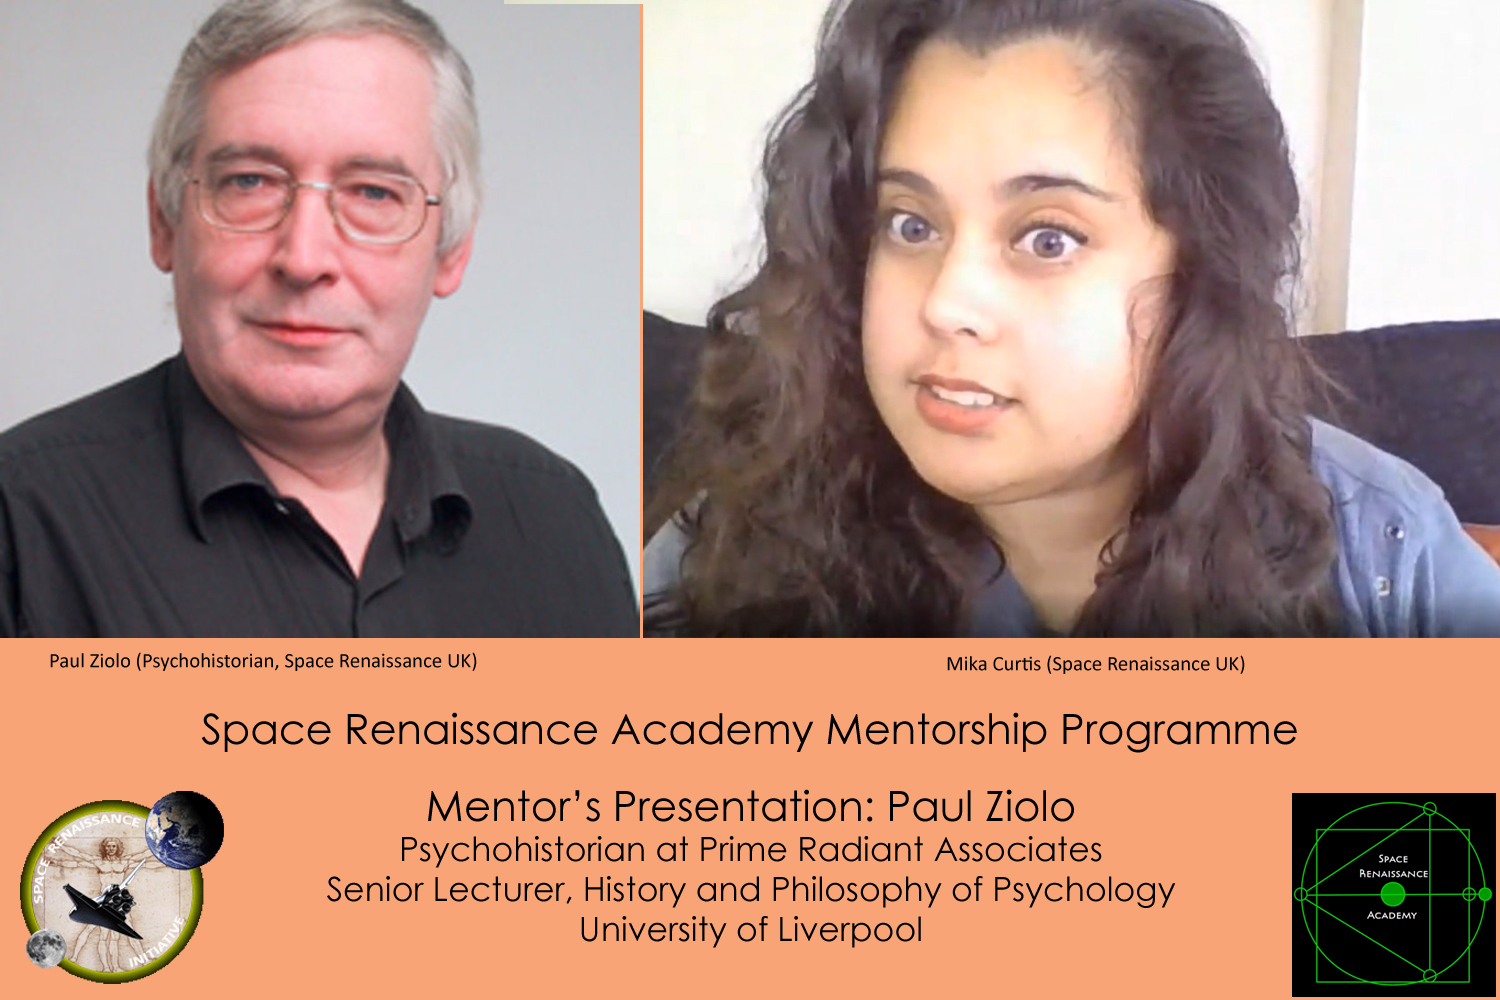 Paul Ziolo, interviewed by Mika Curtis, for the Space Renaissance Academy Mentorship Programme.